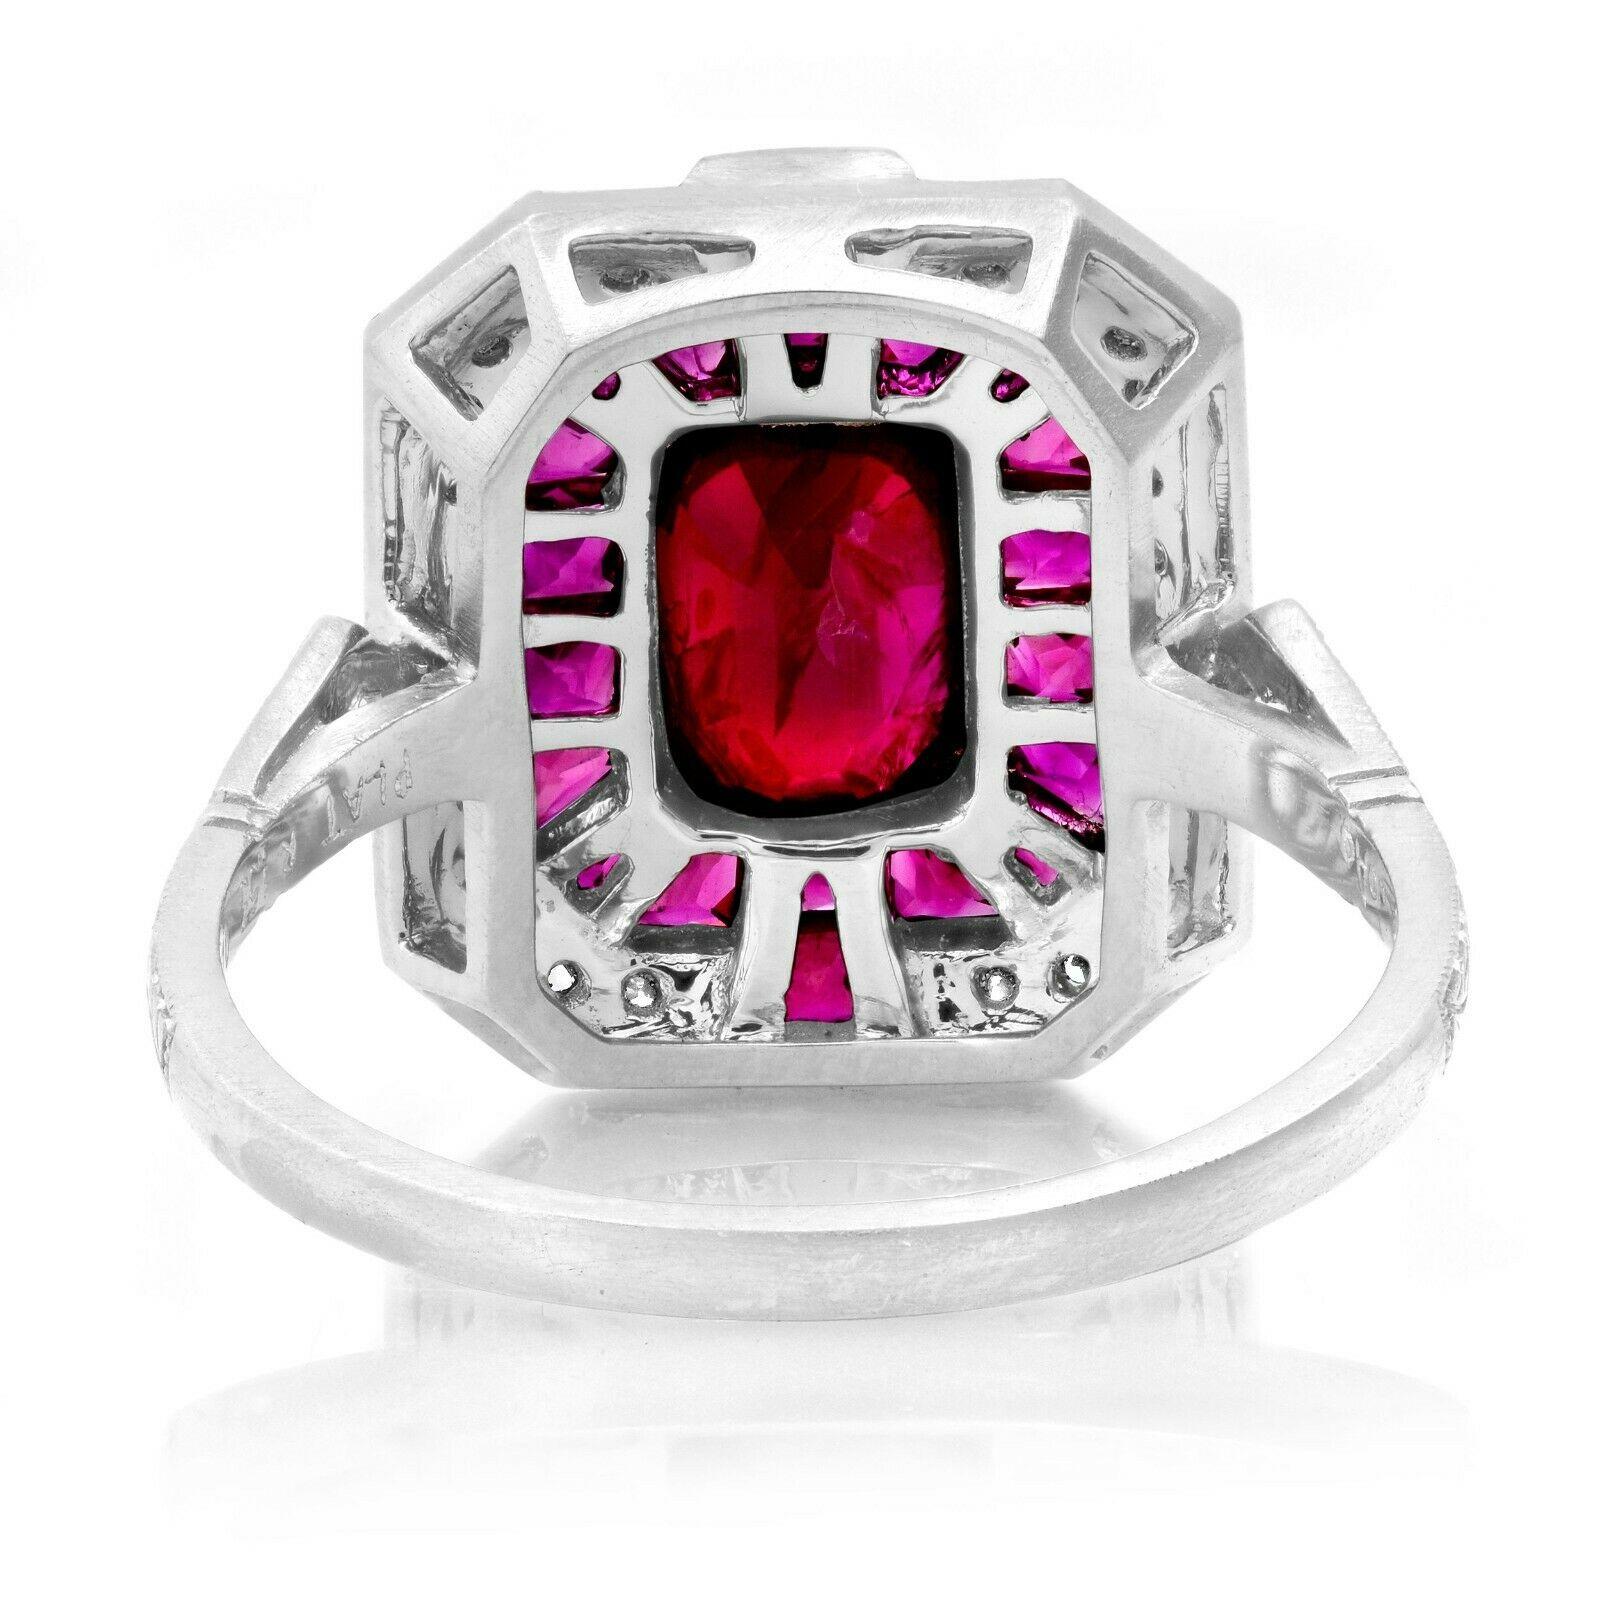 Ruby (1.53 CT center, 2.33 total carat weight) and diamond (0.24 total carat weight) antique inspired cocktail ring in 900 platinum. The ring is designed and handmade locally in Los Angeles by Sage Designs L.A. using earth-mined and conflict free